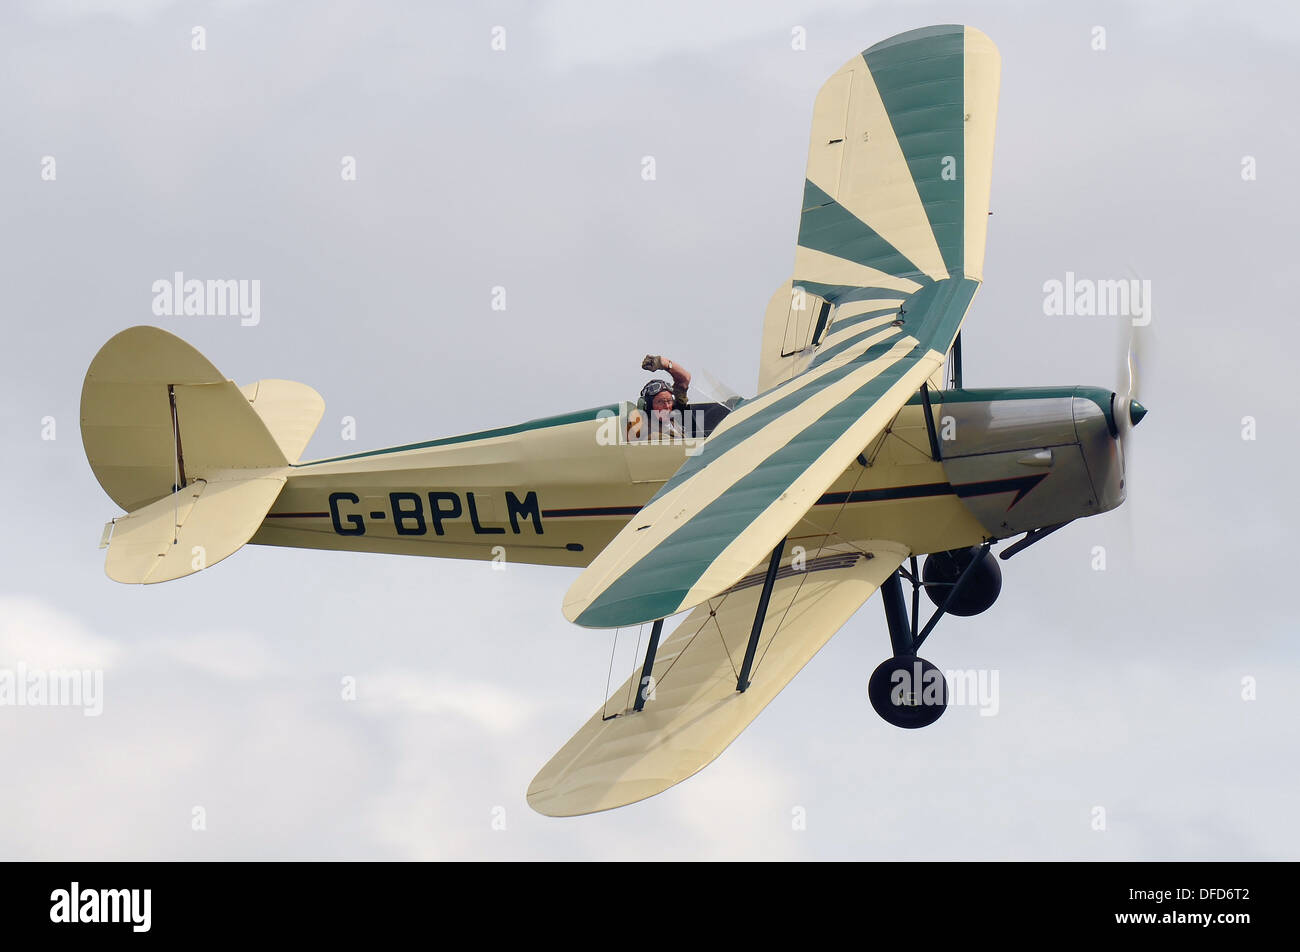 Stampe-Vertongen SV-4C. The SV.4 was designed as a biplane tourer/training aircraft in the early 1930s by Stampe et Vertongen at Antwerp. Stock Photo